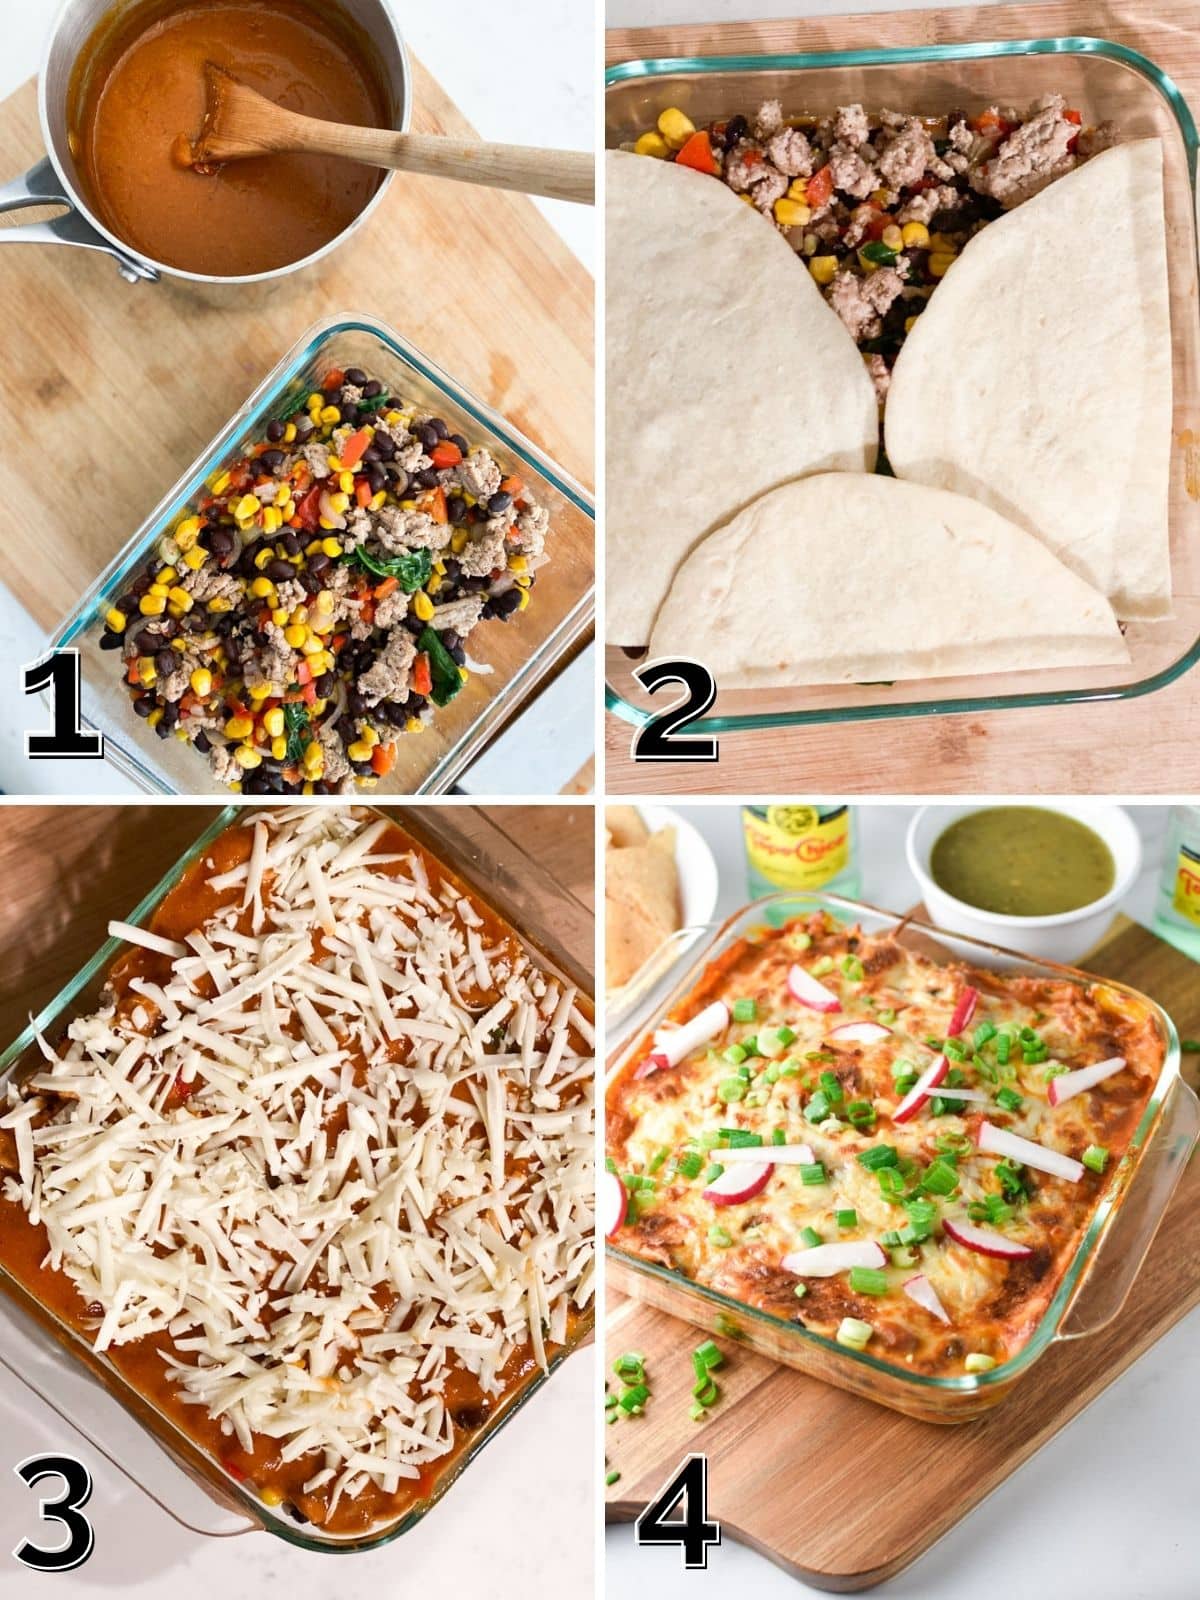 A step by step process for making enchilada casserole from preparing the sauce, layering tortillas and meat, and adding cheese